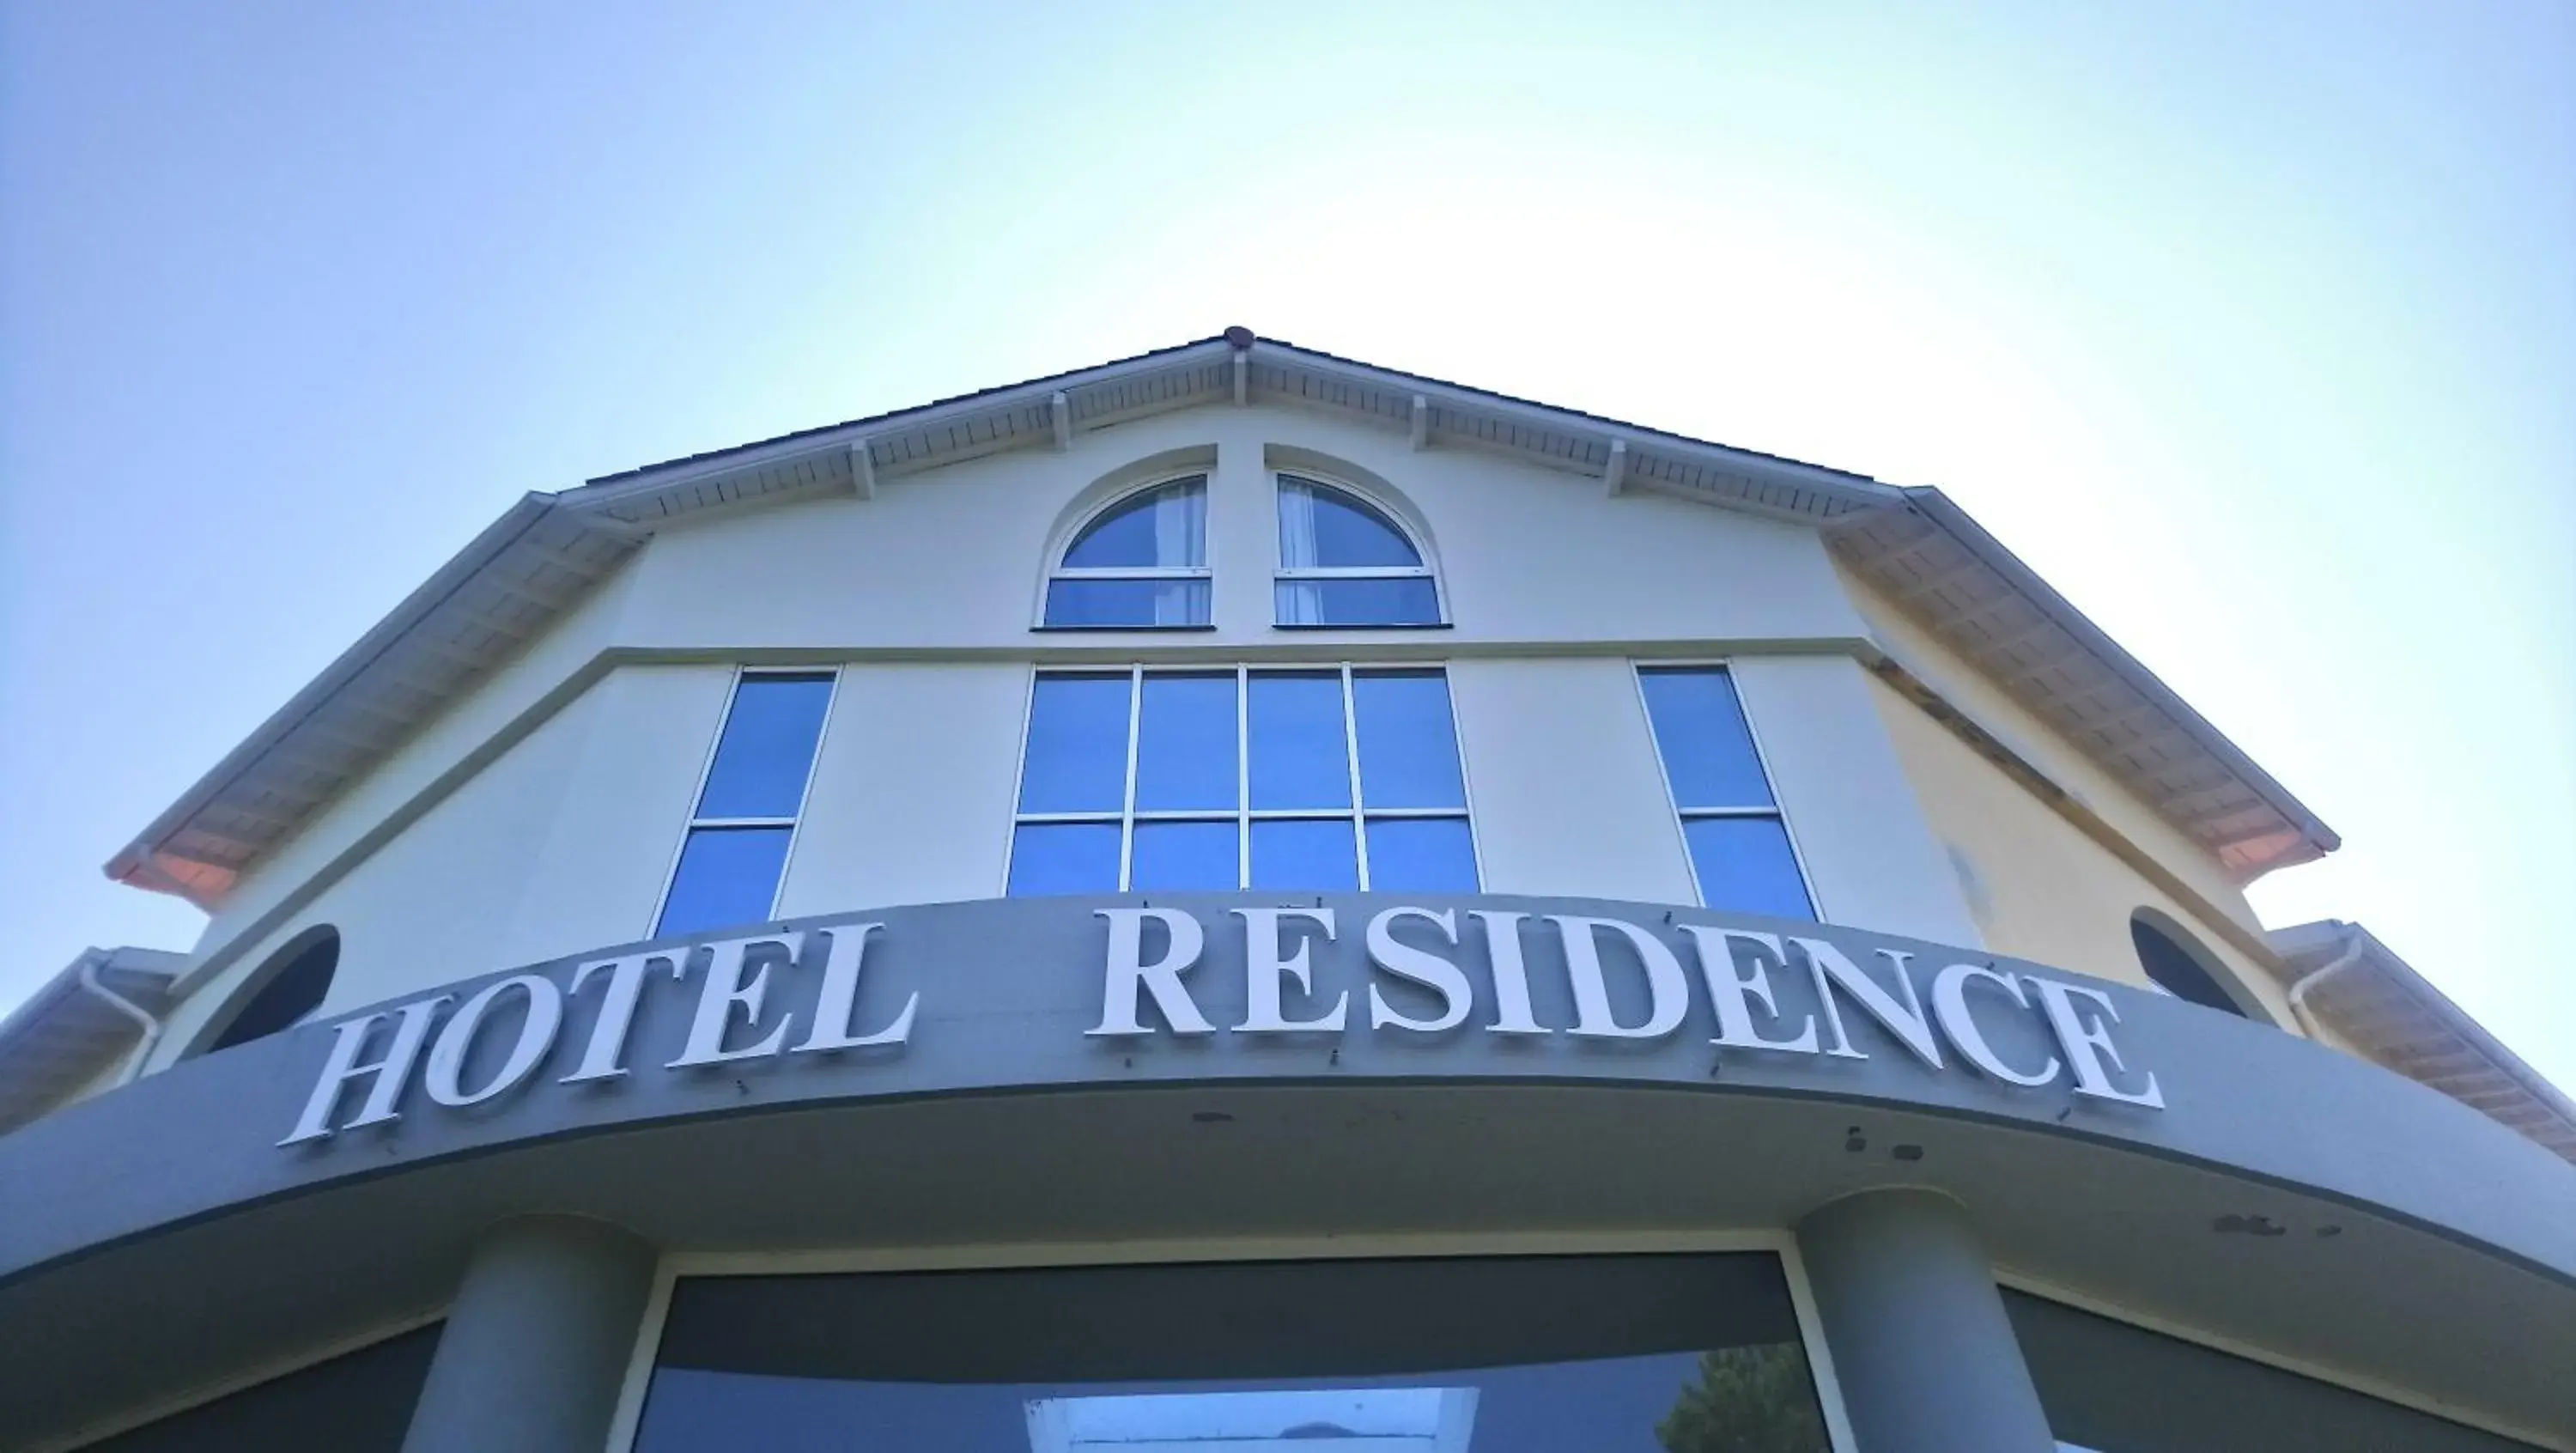 Property logo or sign, Property Building in Hotel Résidence Anglet Biarritz-Parme